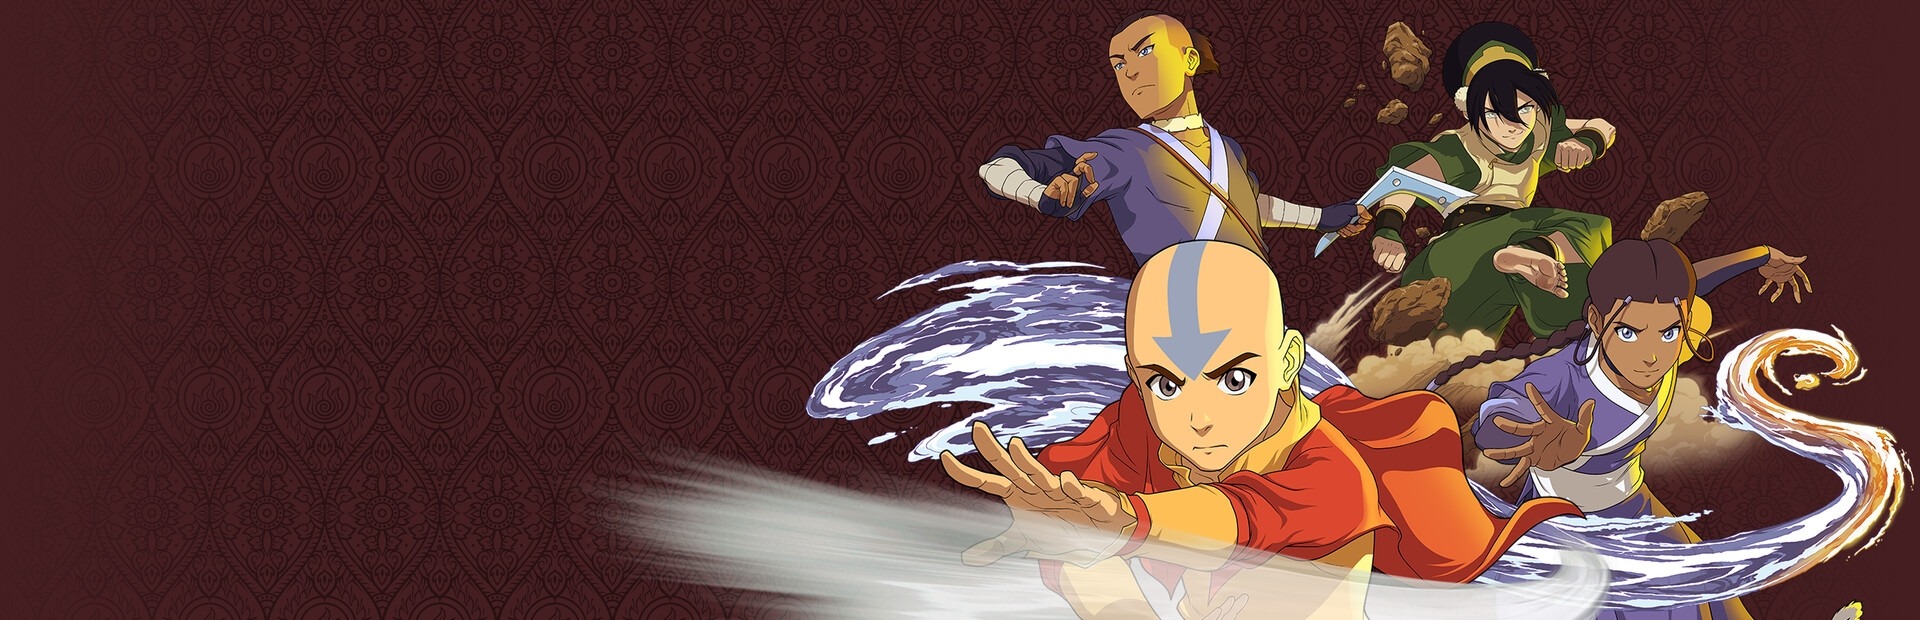 Avatar: The Last Airbender - Quest for Balance